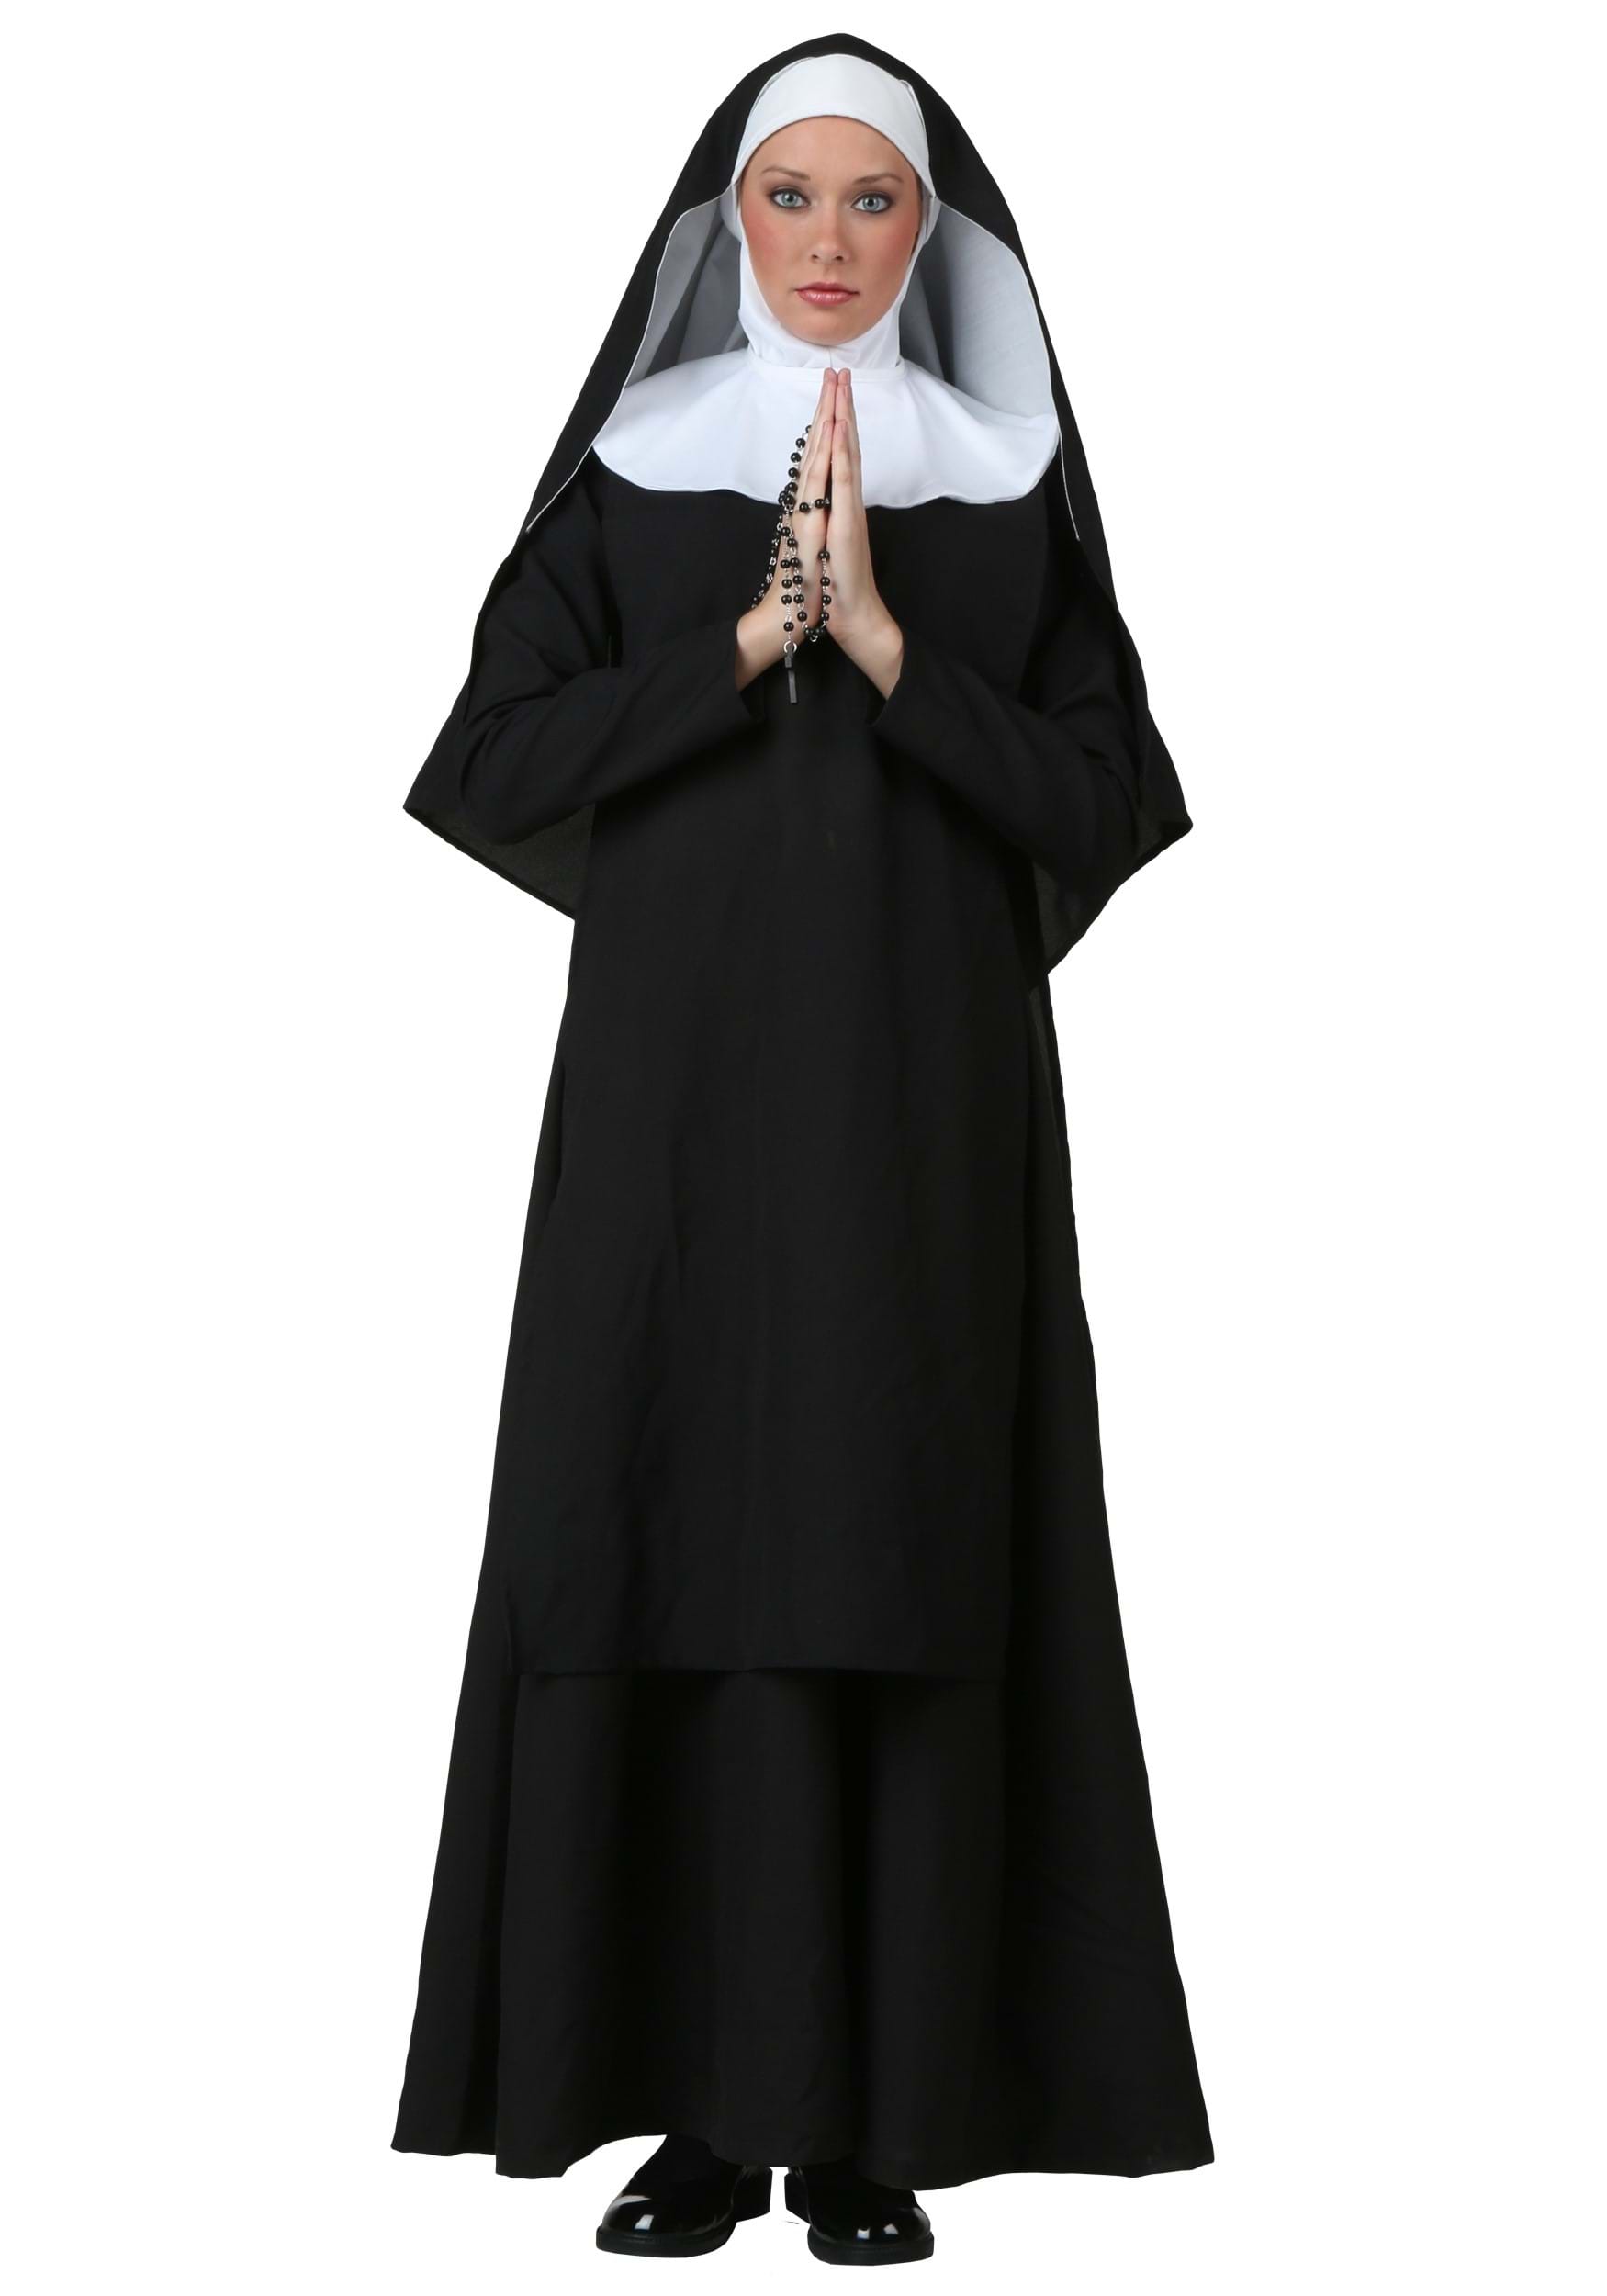 Photos - Fancy Dress Deluxe FUN Costumes  Nun Costume for Women | Adult Religious Costumes Black 